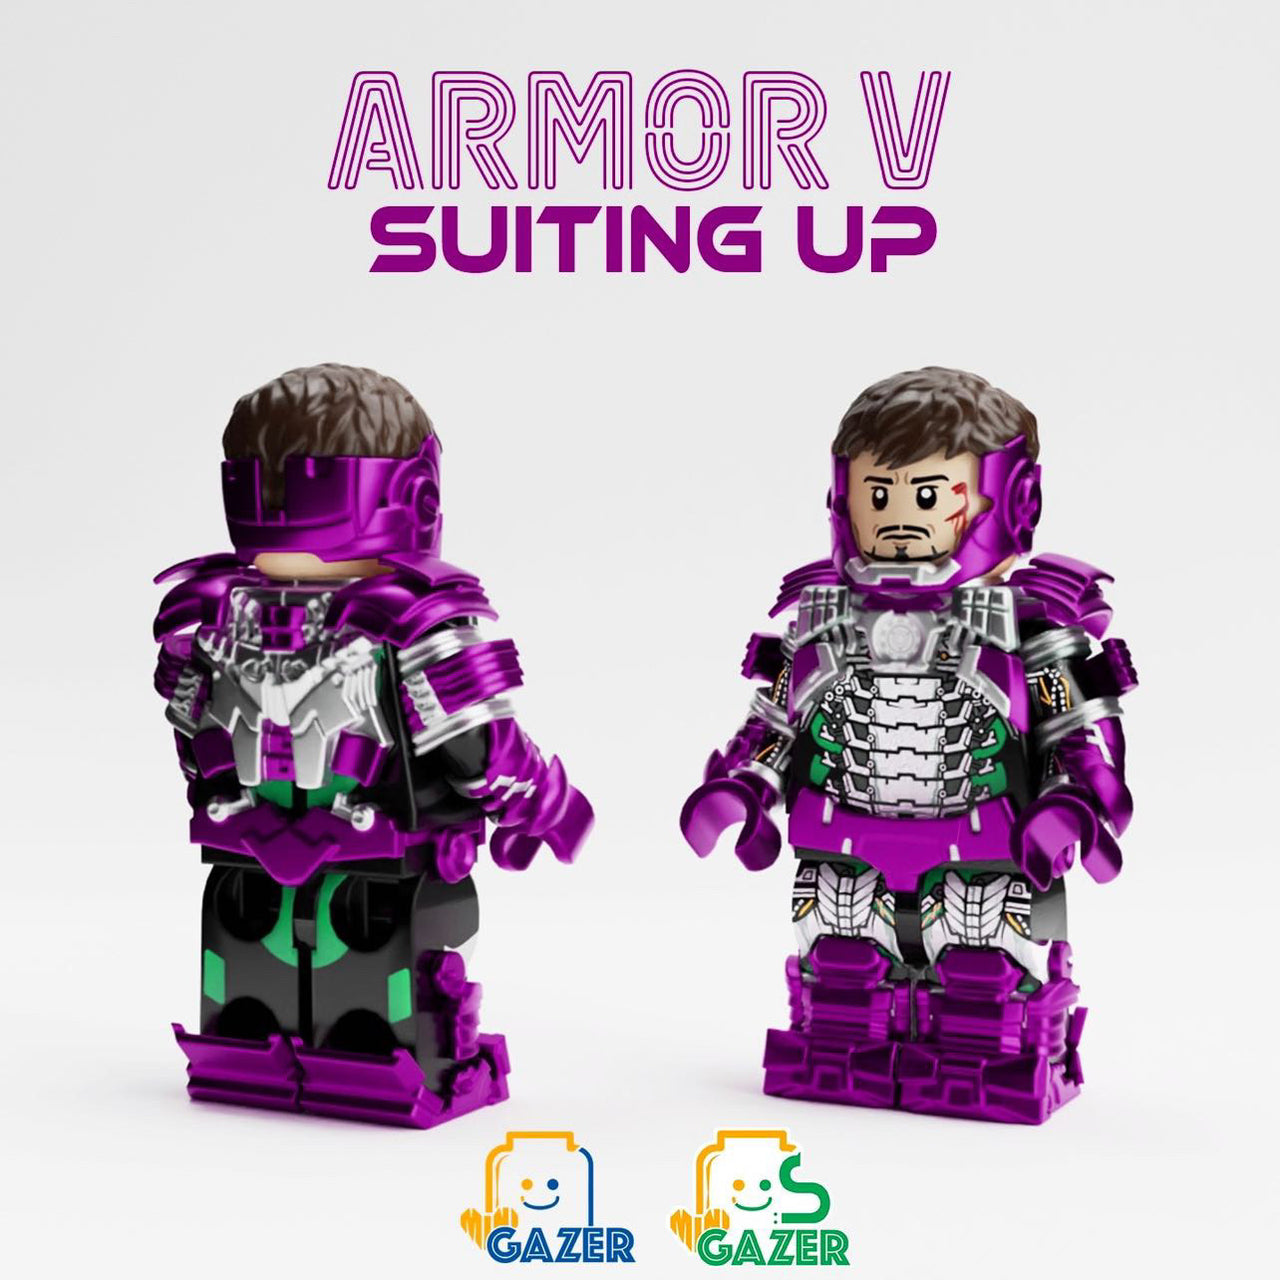 Armor V (Suiting Up) Purple Variant by miniGAZER [PRE-ORDER]